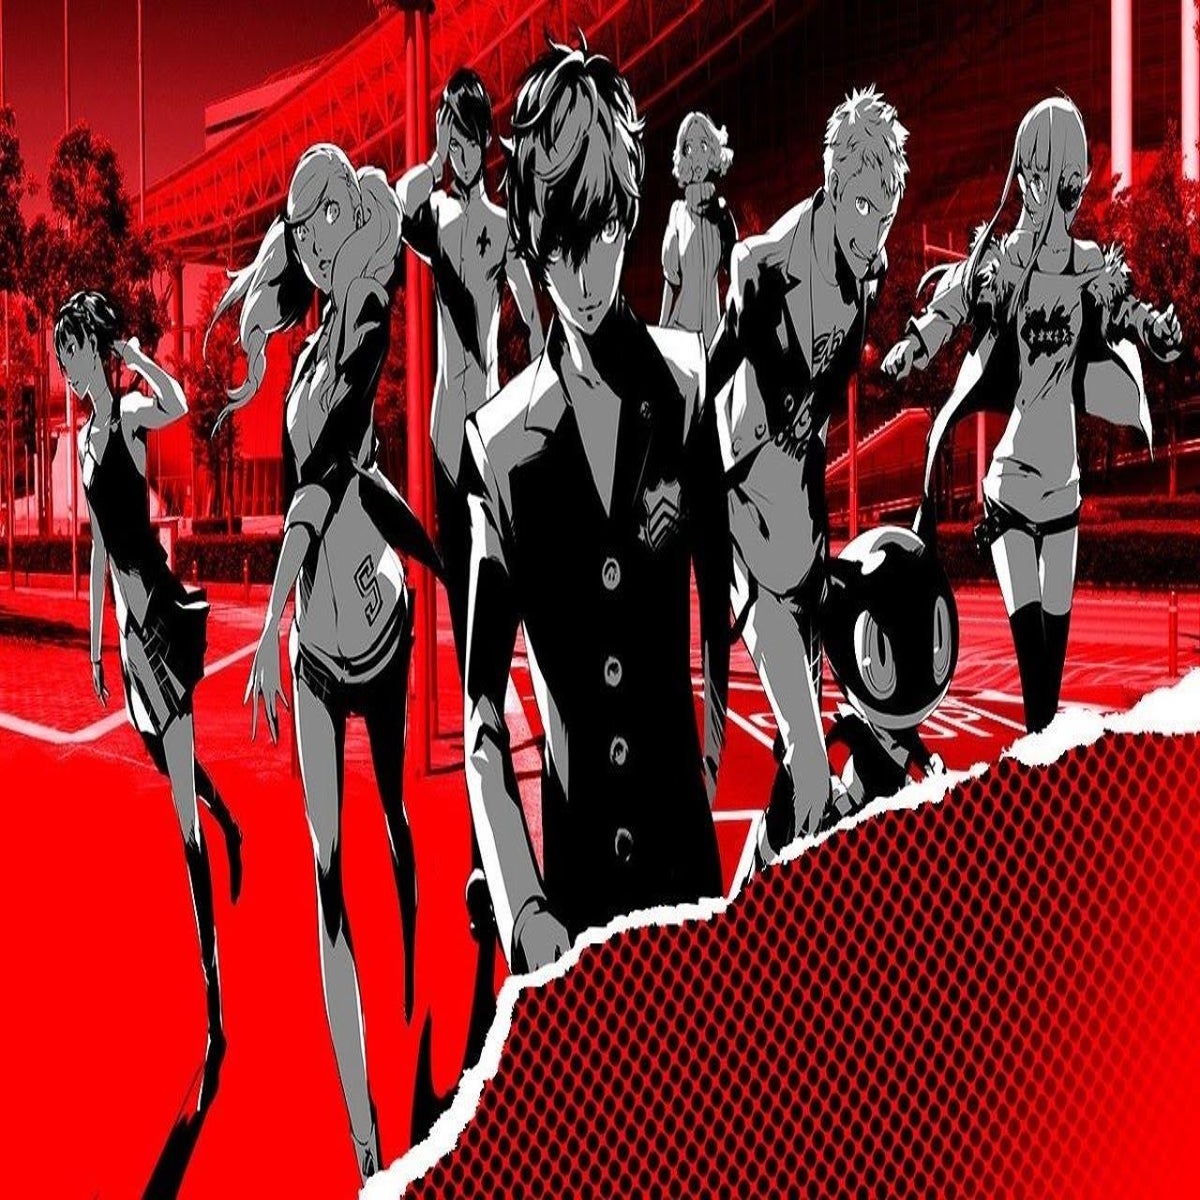 Full Opening Theme for Persona 5 the Animation Previewed - Persona Central